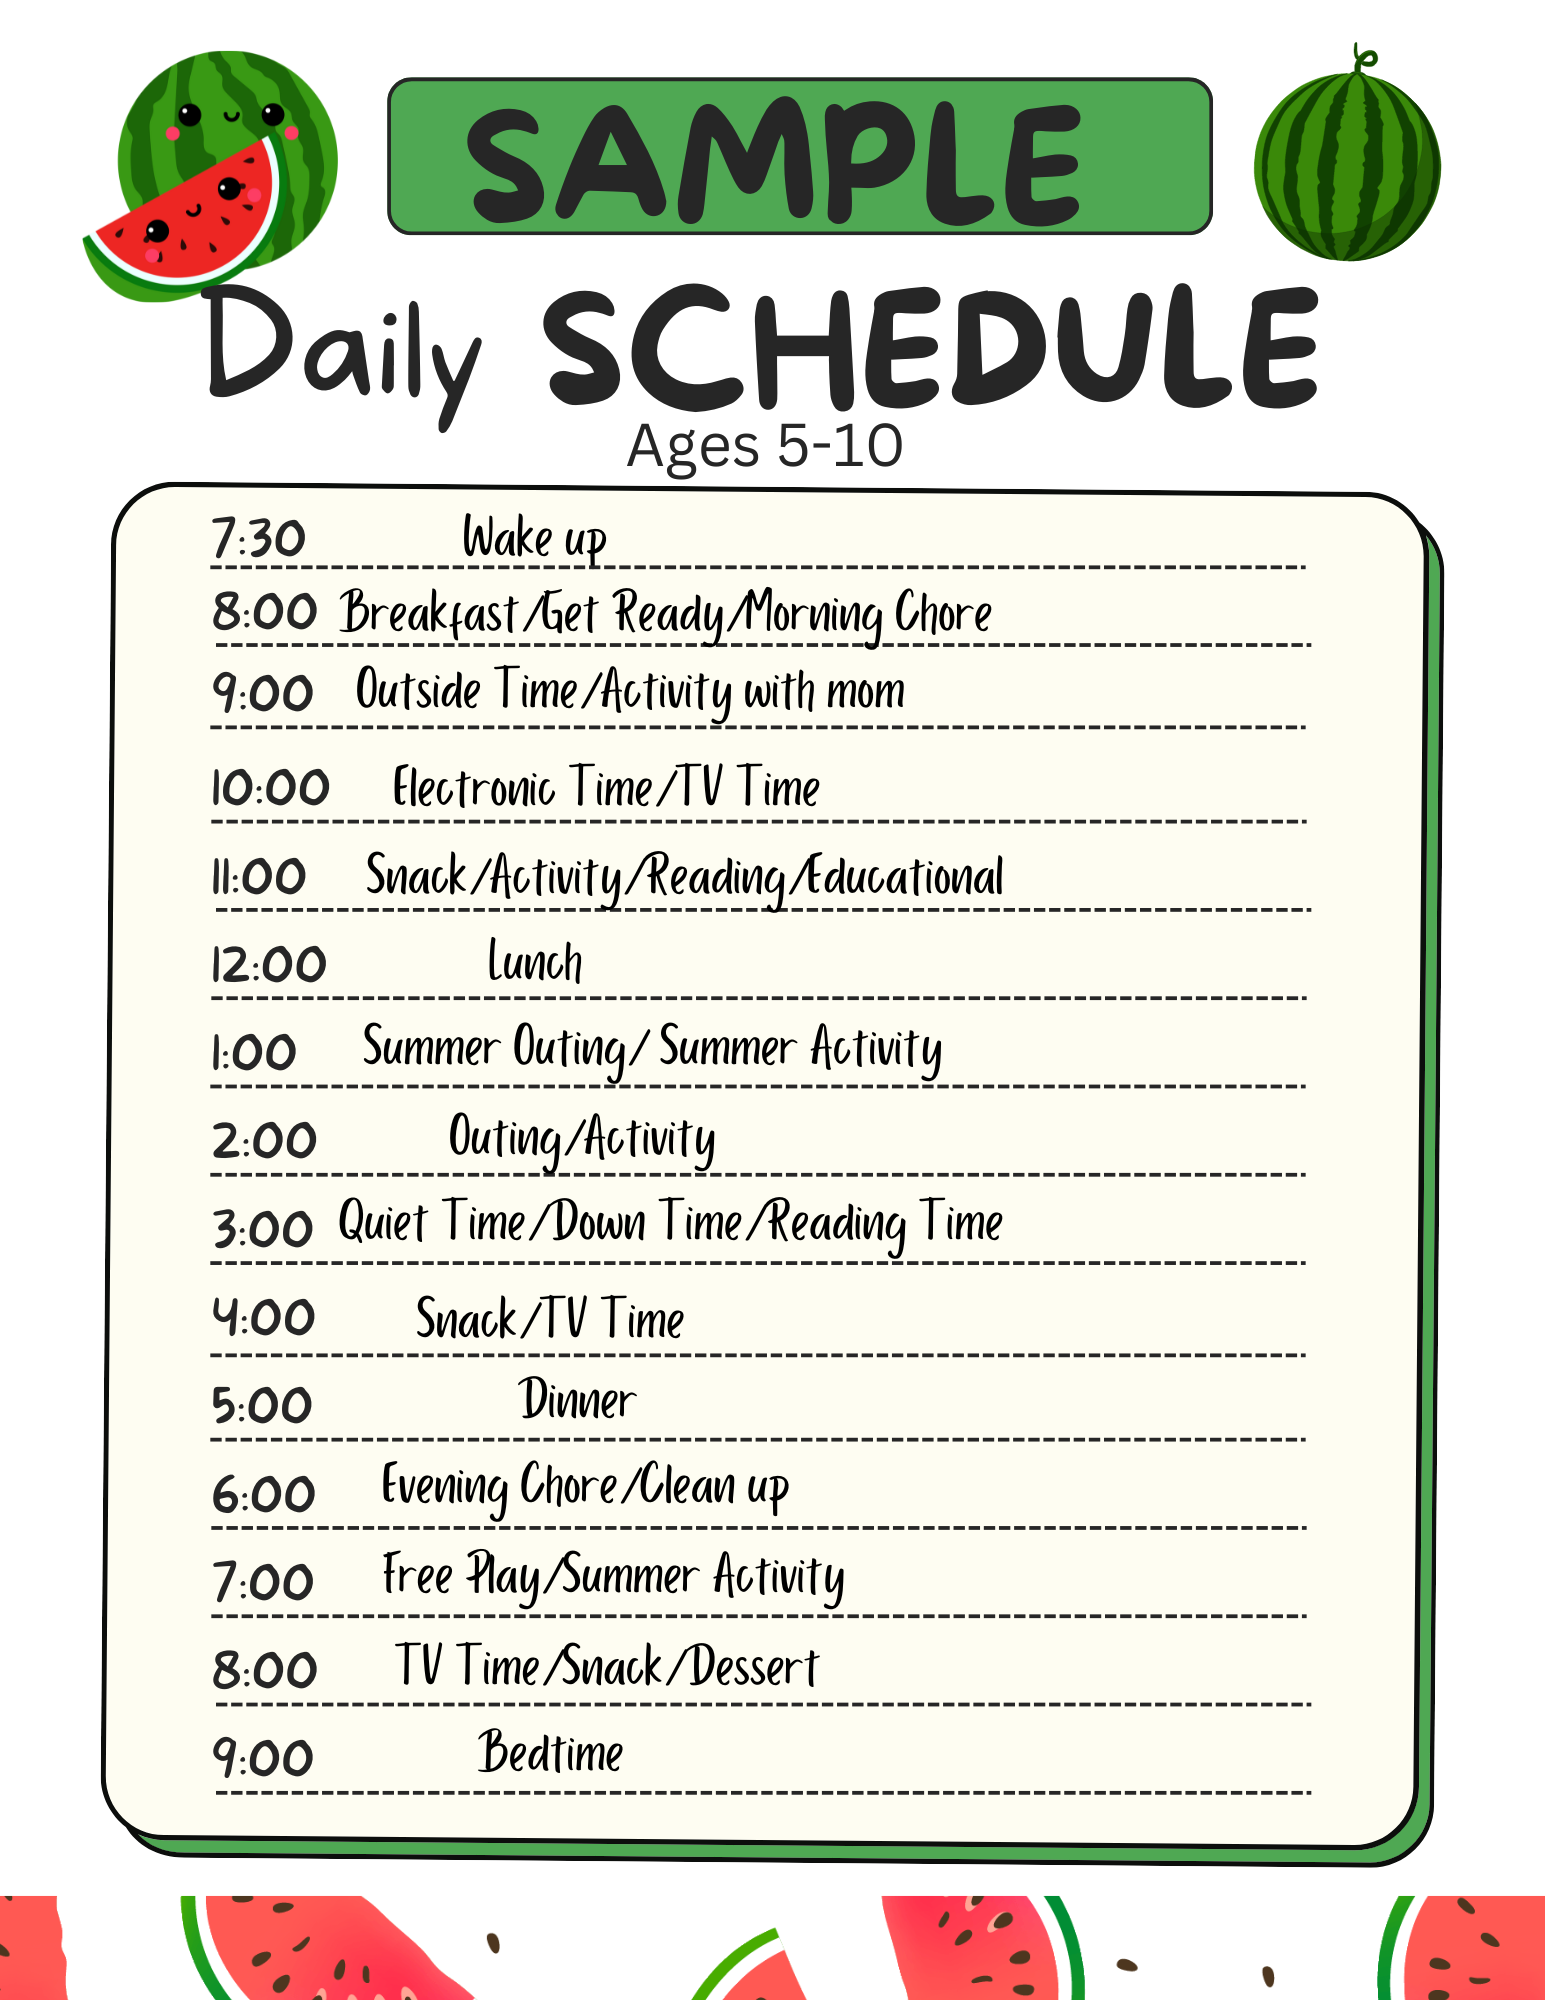 Sample daily schedule for kids ages 5-10.